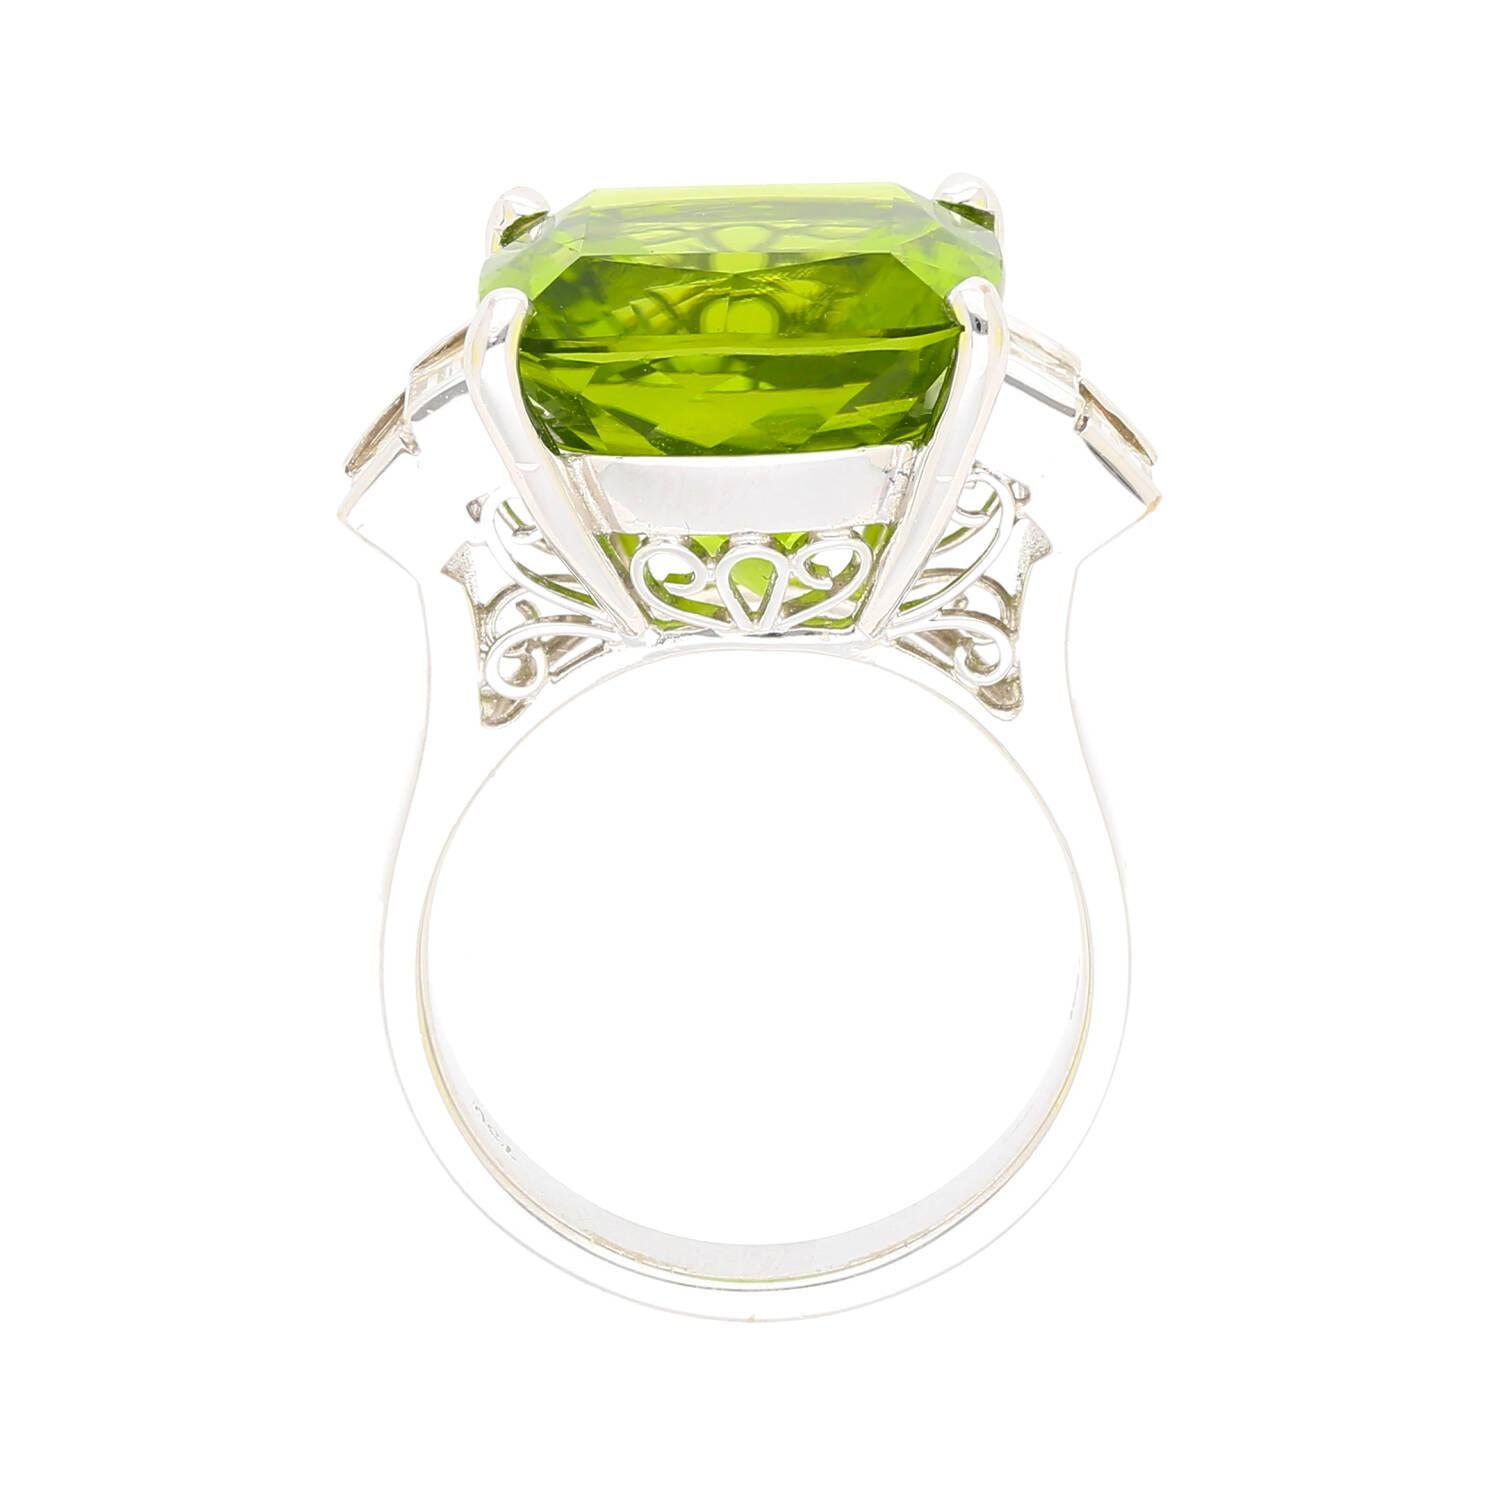 Modern 14.11ct Green Peridot and 0.91ctw Diamond Side-Stones in 18k White Gold Ring For Sale